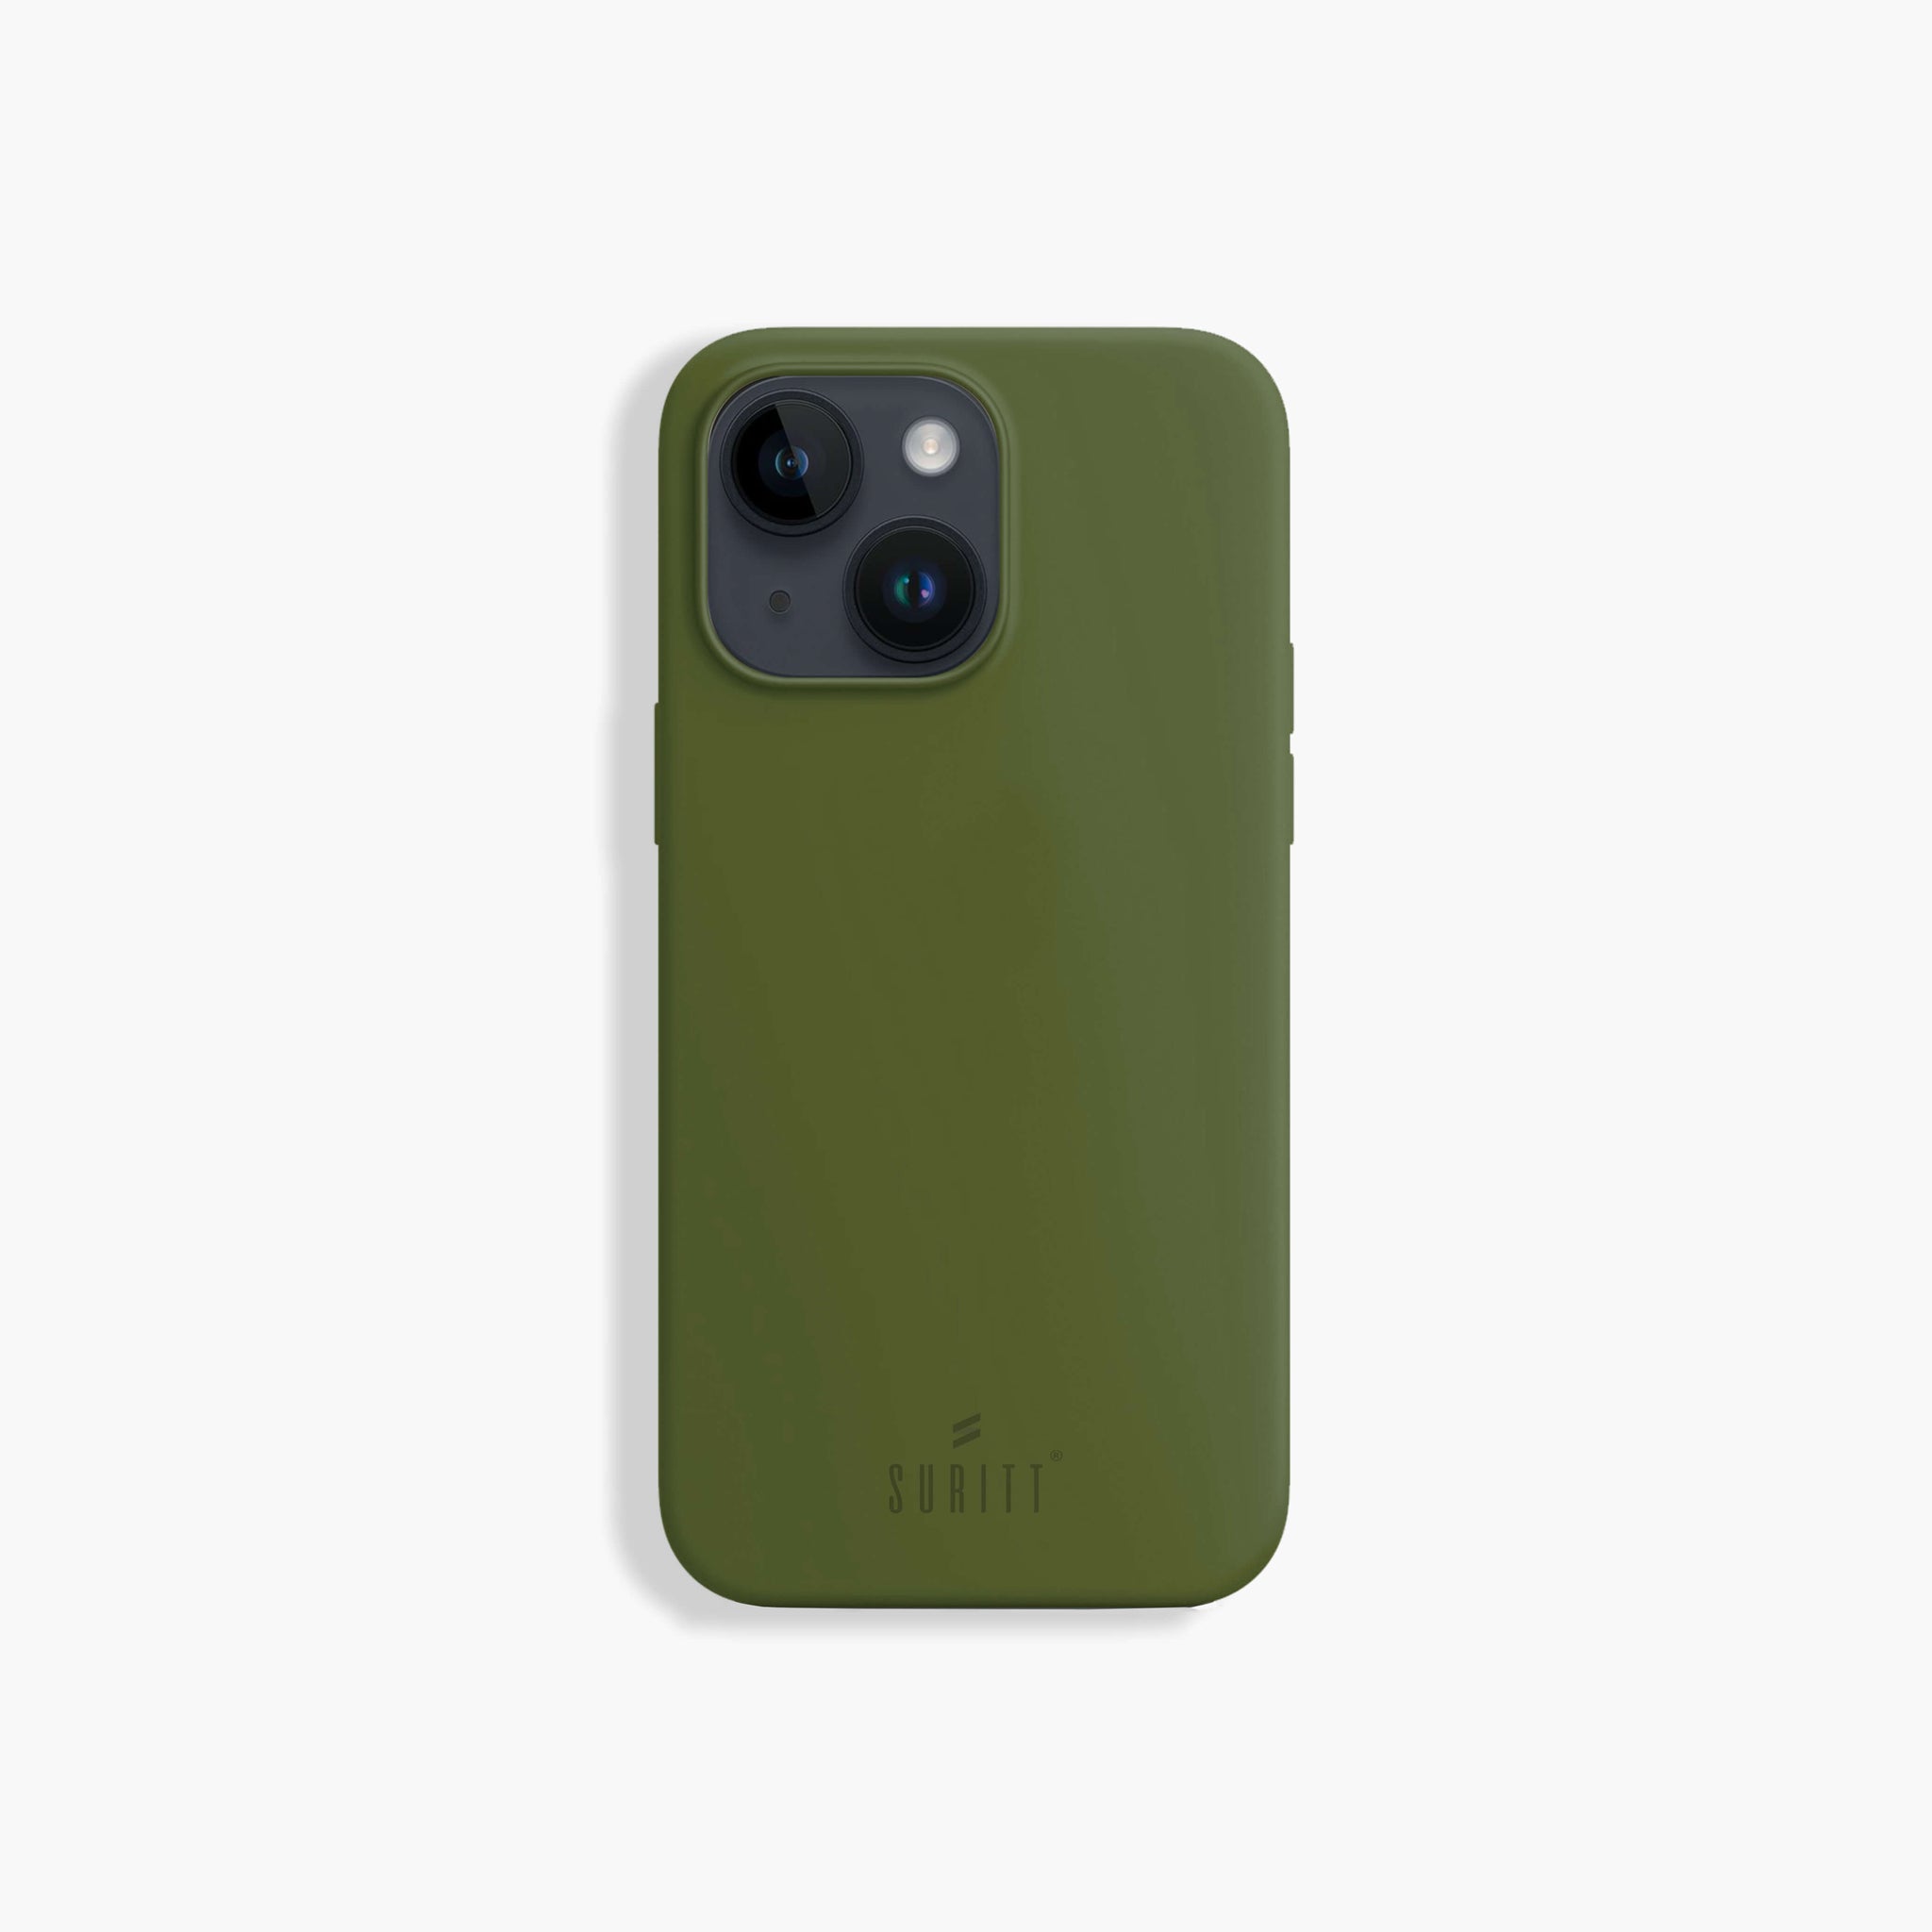 iPhone Coque Silicone Military Green